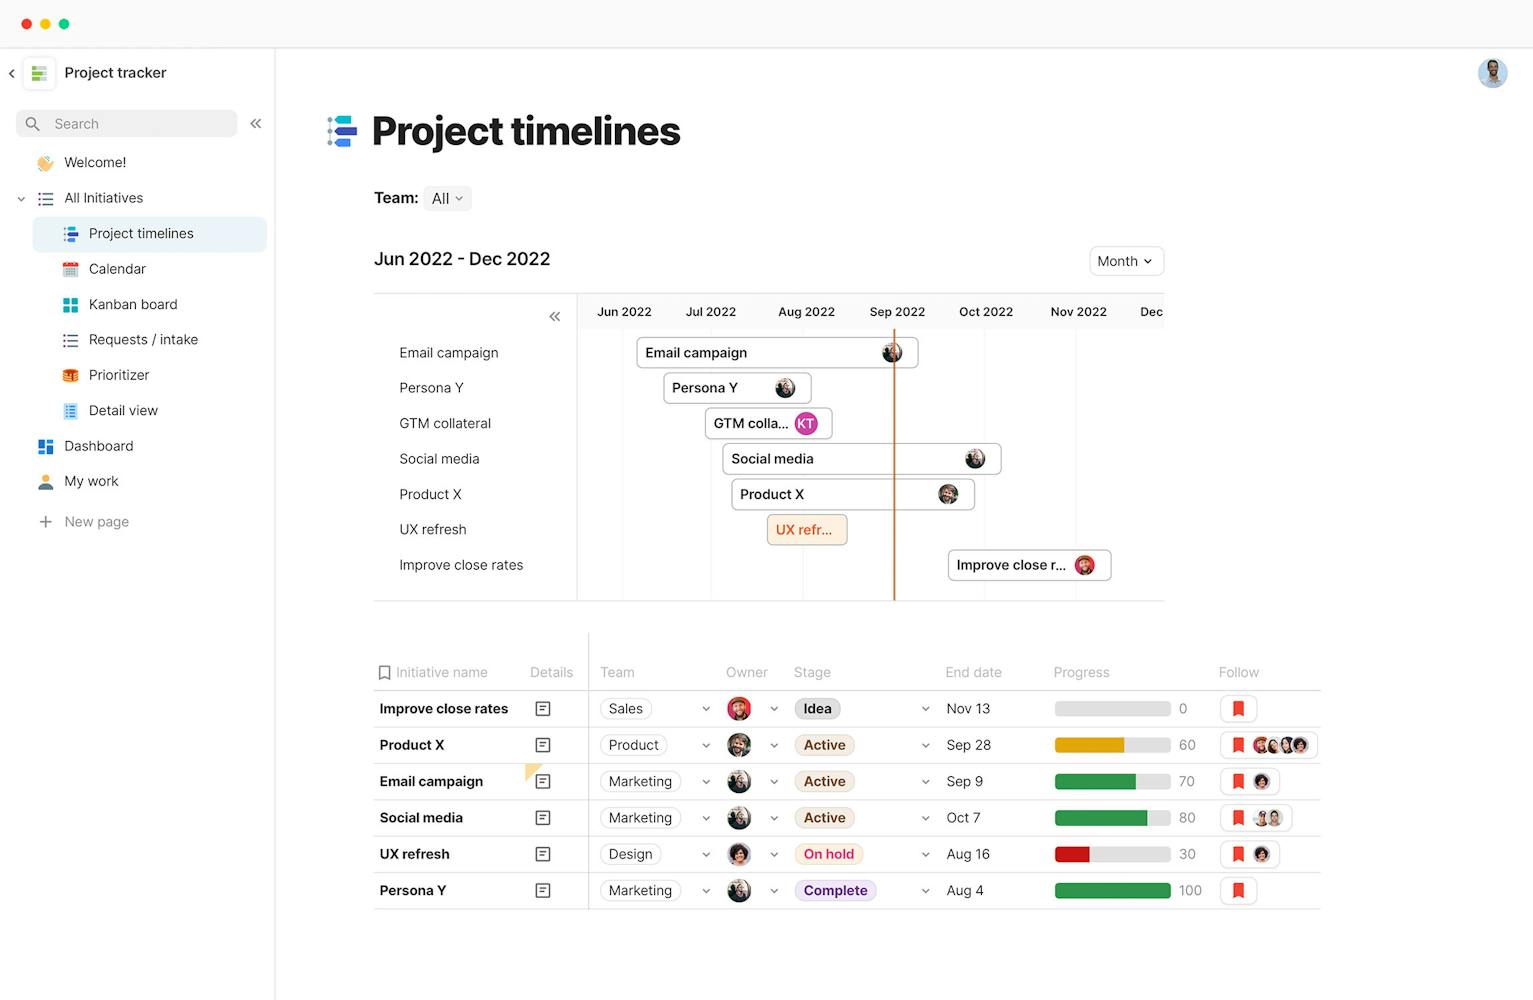 Screenshot of a timeline and task list within a collaborative project tracker